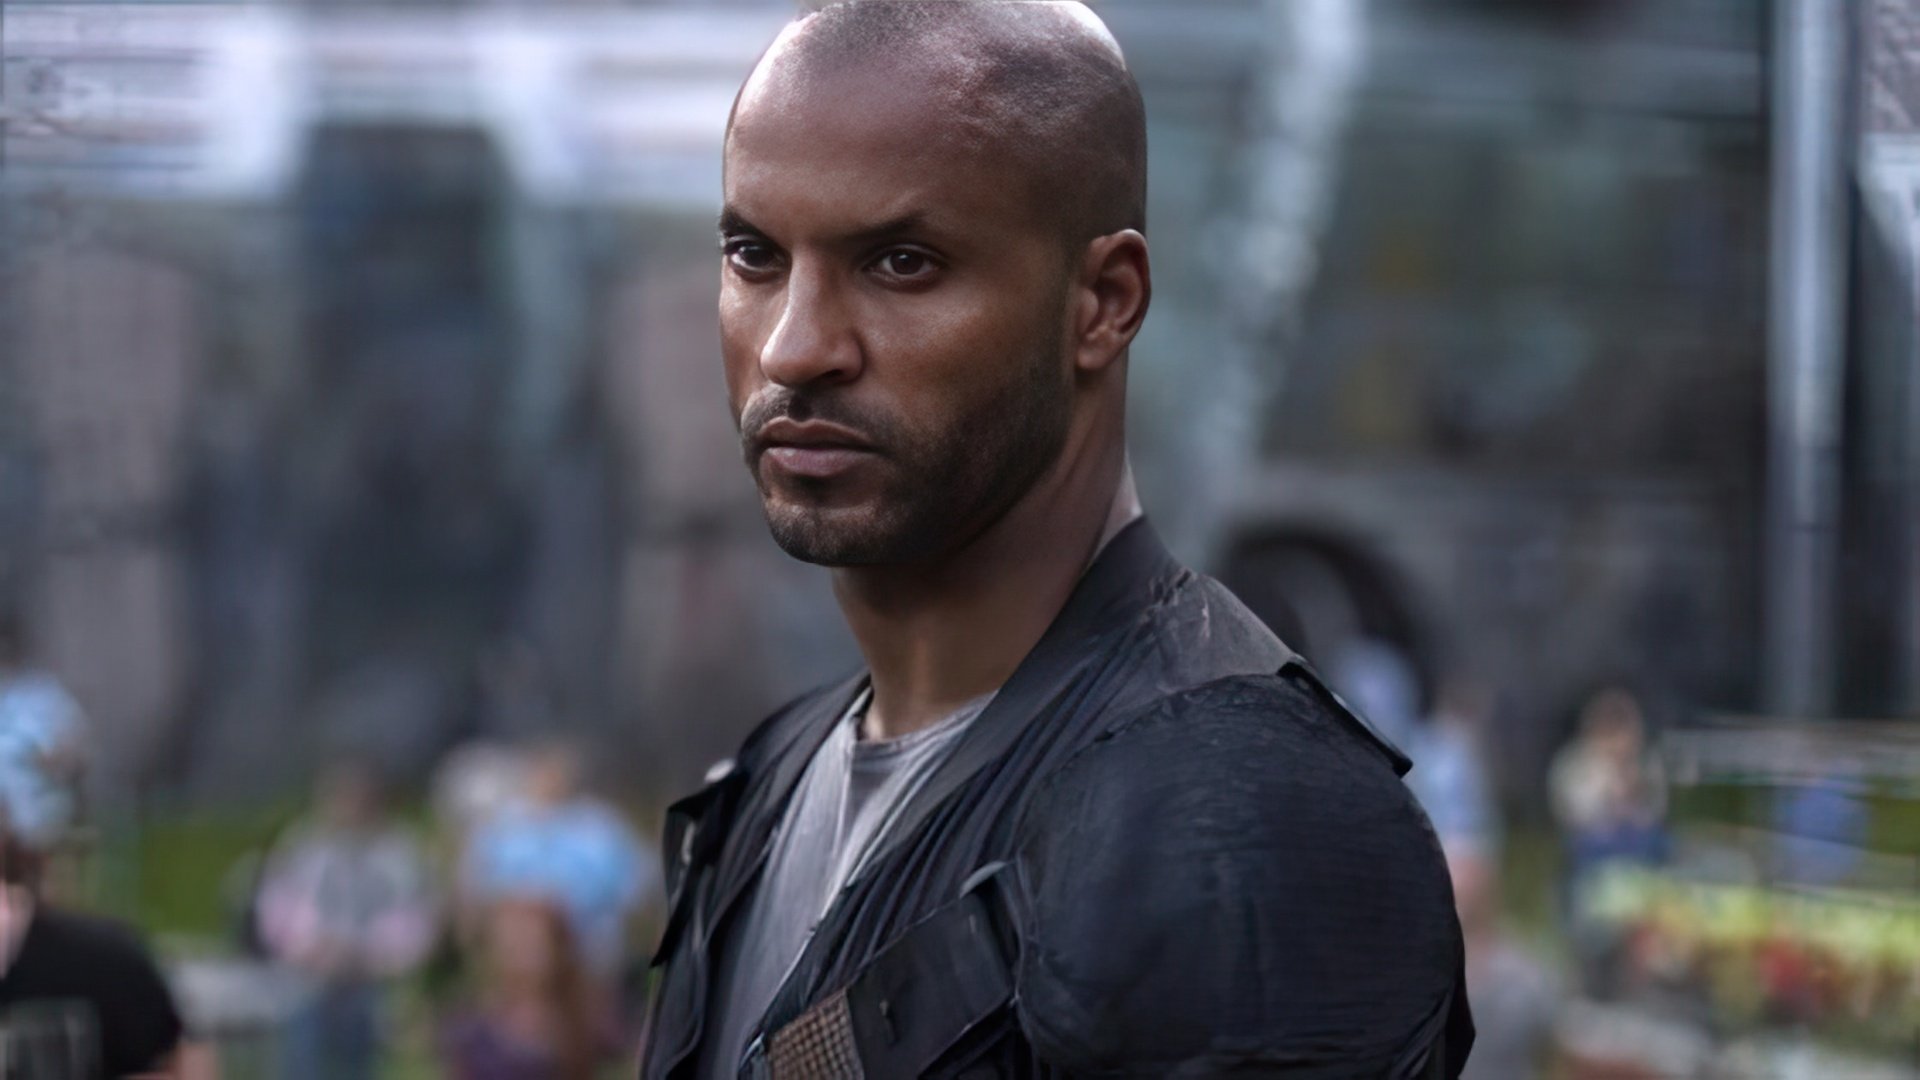 Ricky Whittle is not married yet